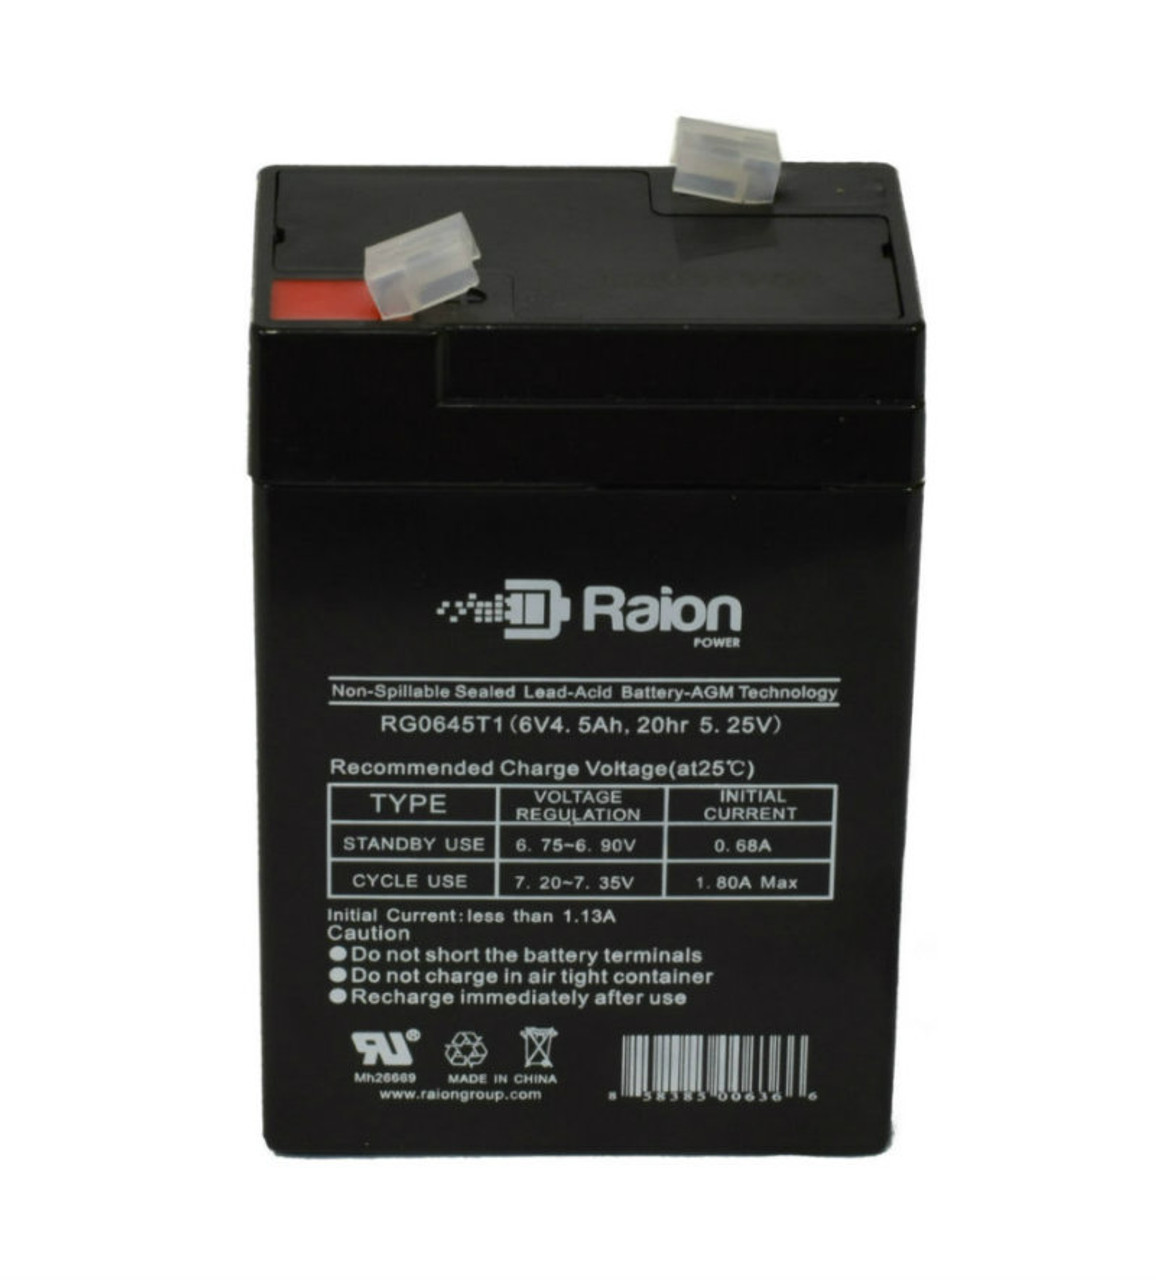 Raion Power RG0645T1 Replacement Battery Cartridge for Ademco 456651